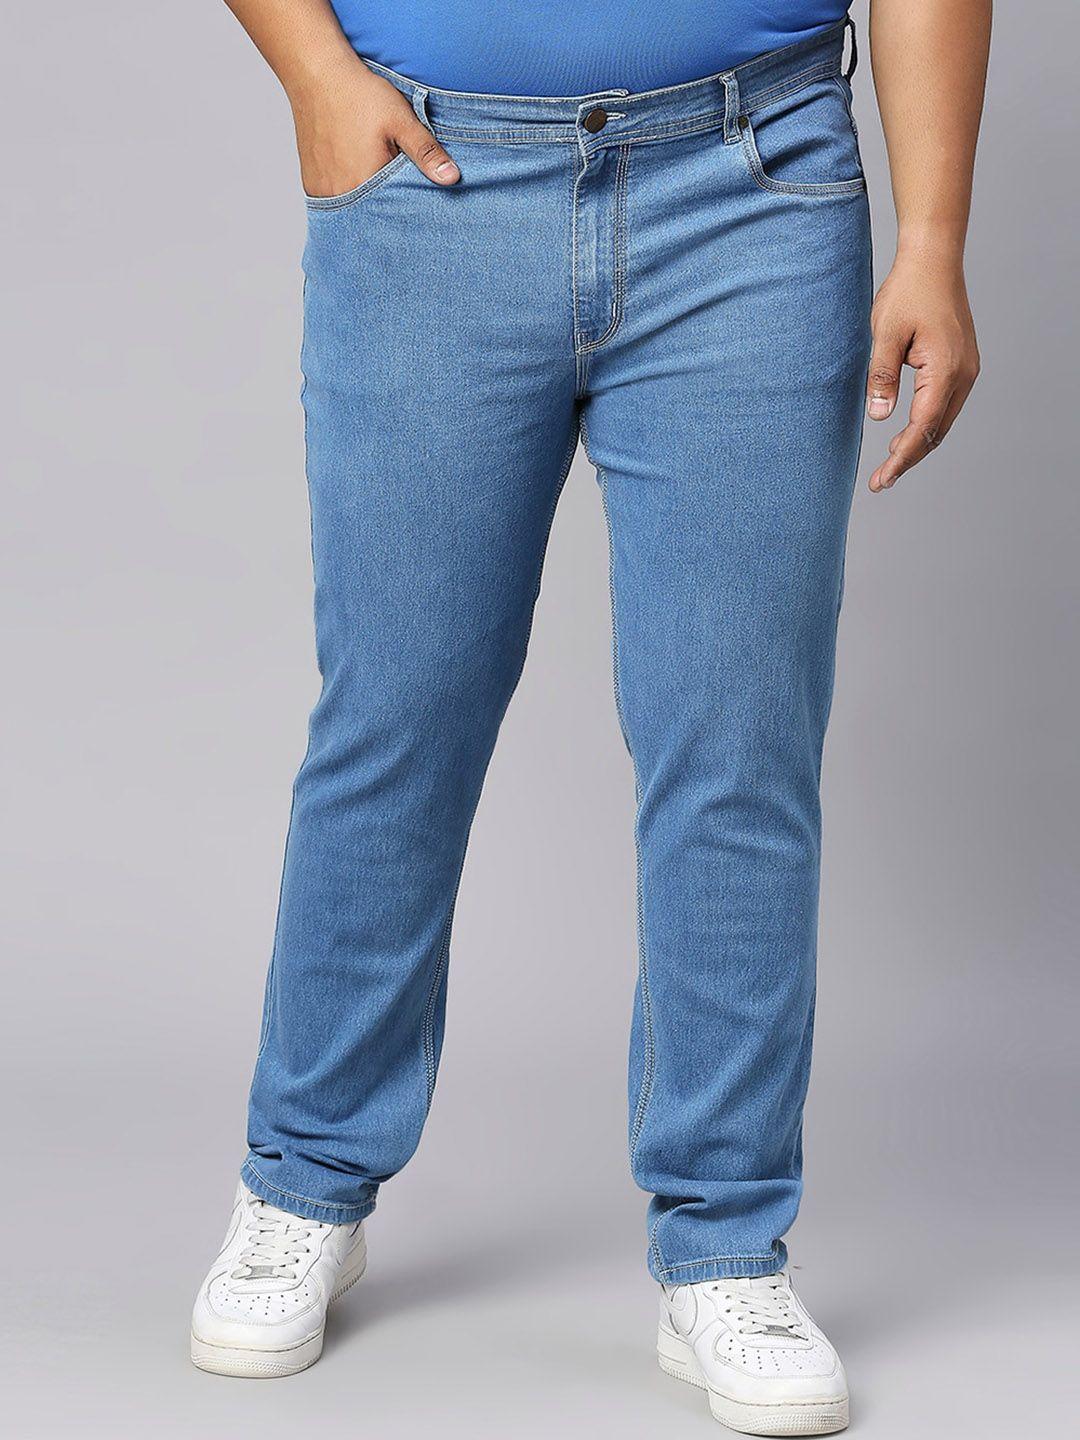 hj hasasi men plus size clean look stretchable jeans